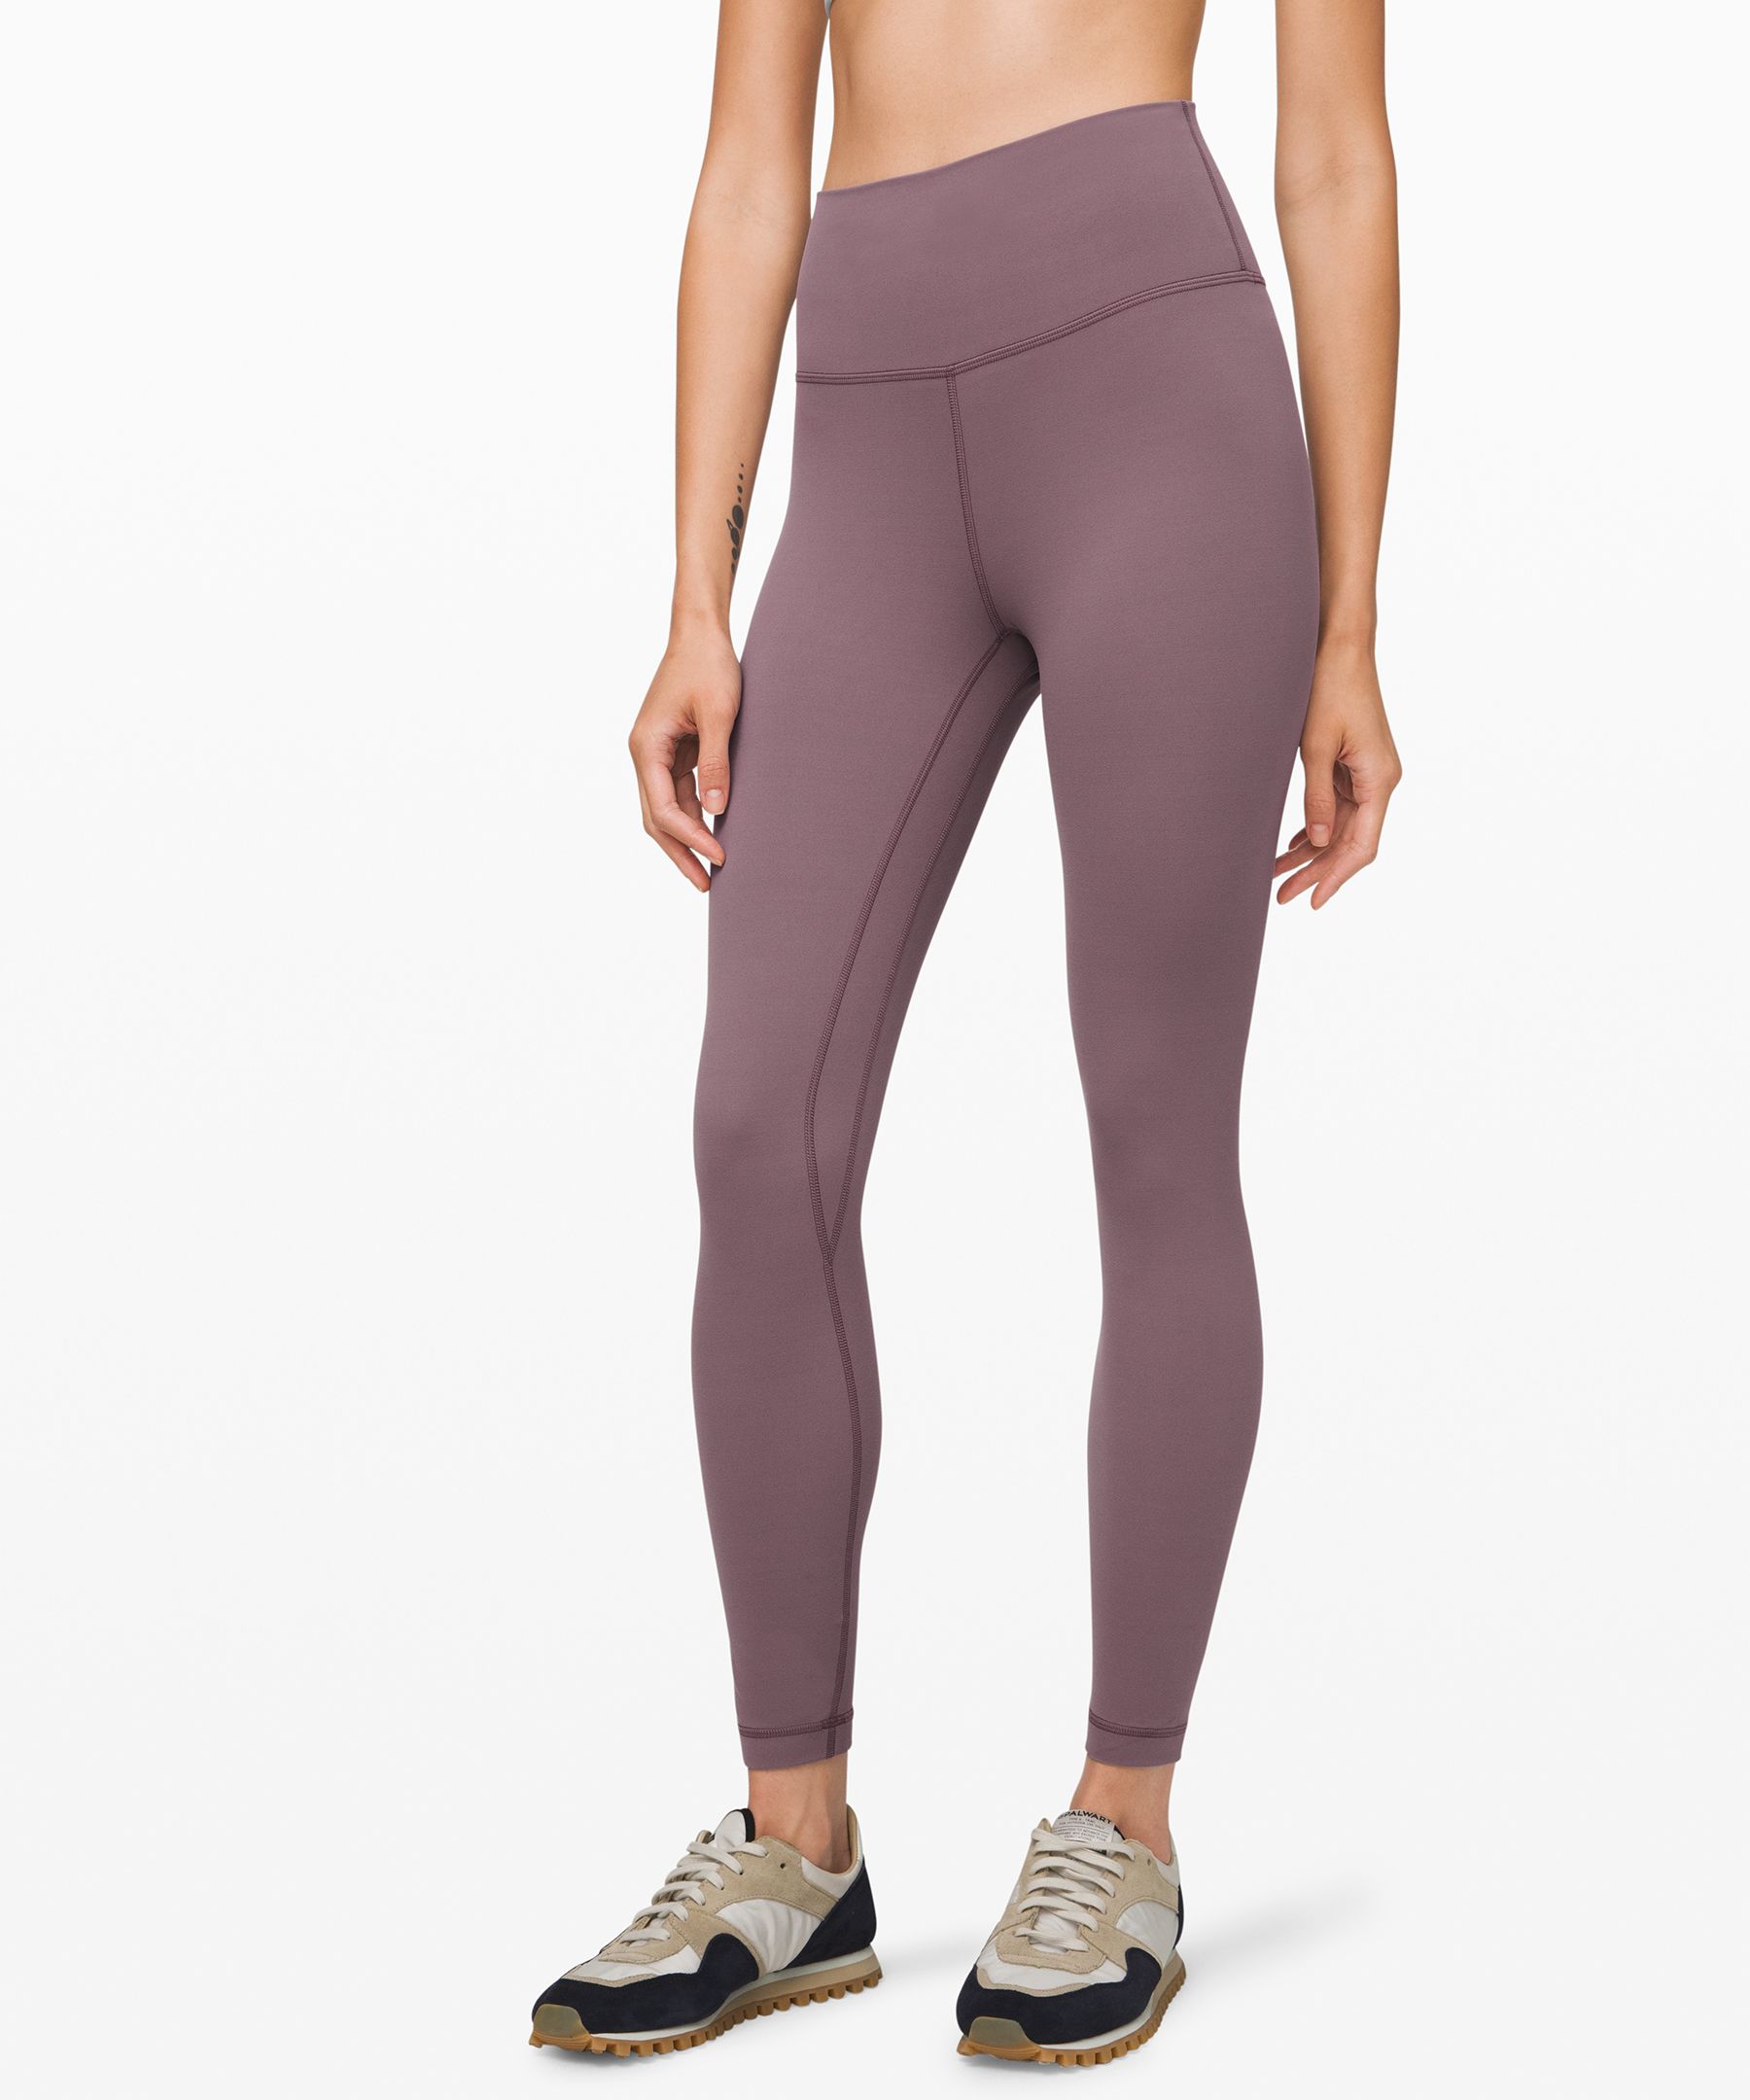 Lululemon Leggings Swift Speed *Asia Fit in Spiced Chai Size M, Women's  Fashion, Activewear on Carousell